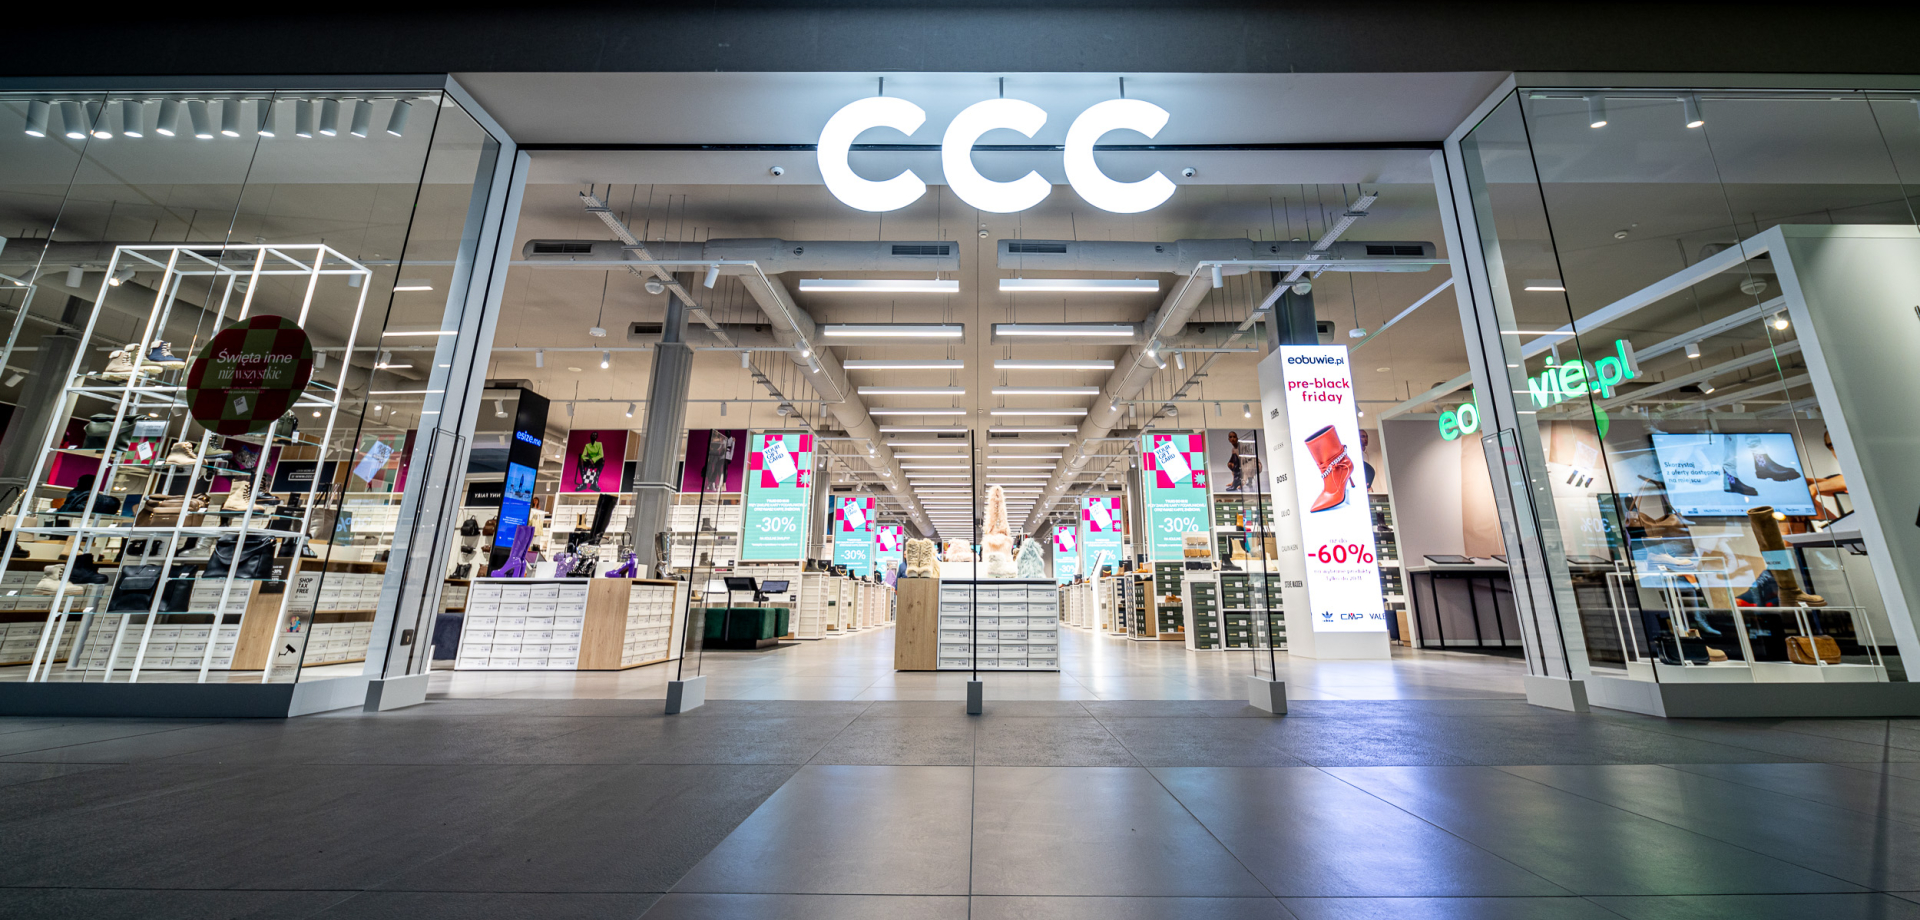 CCC Group successfully finalises over PLN 500m share capital increase